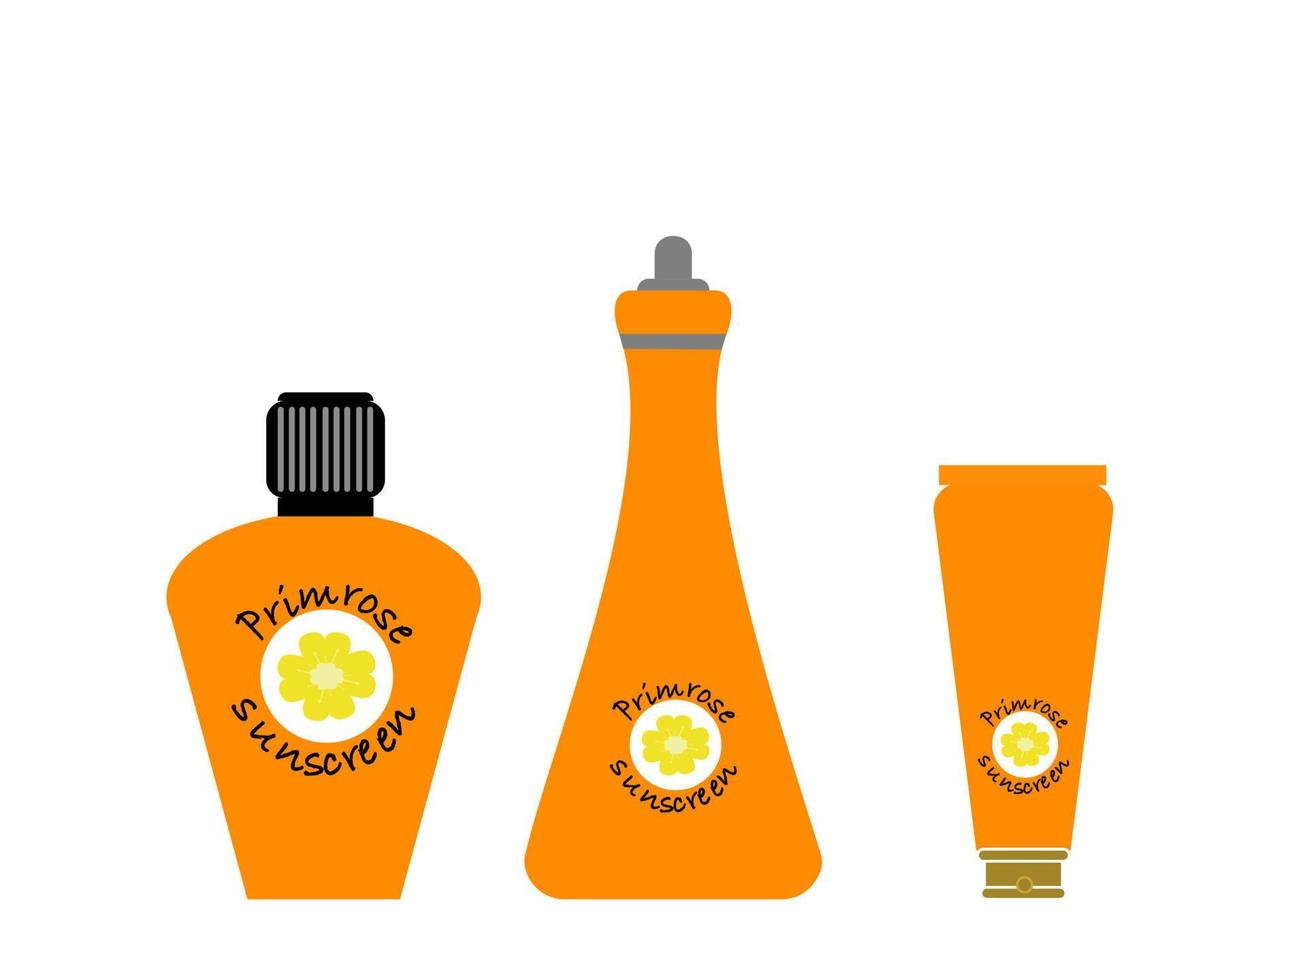 Primrose Sunscreen bottle set, can be applied to the skin in the sun. To preserve the skin smooth, soft and moist. vector